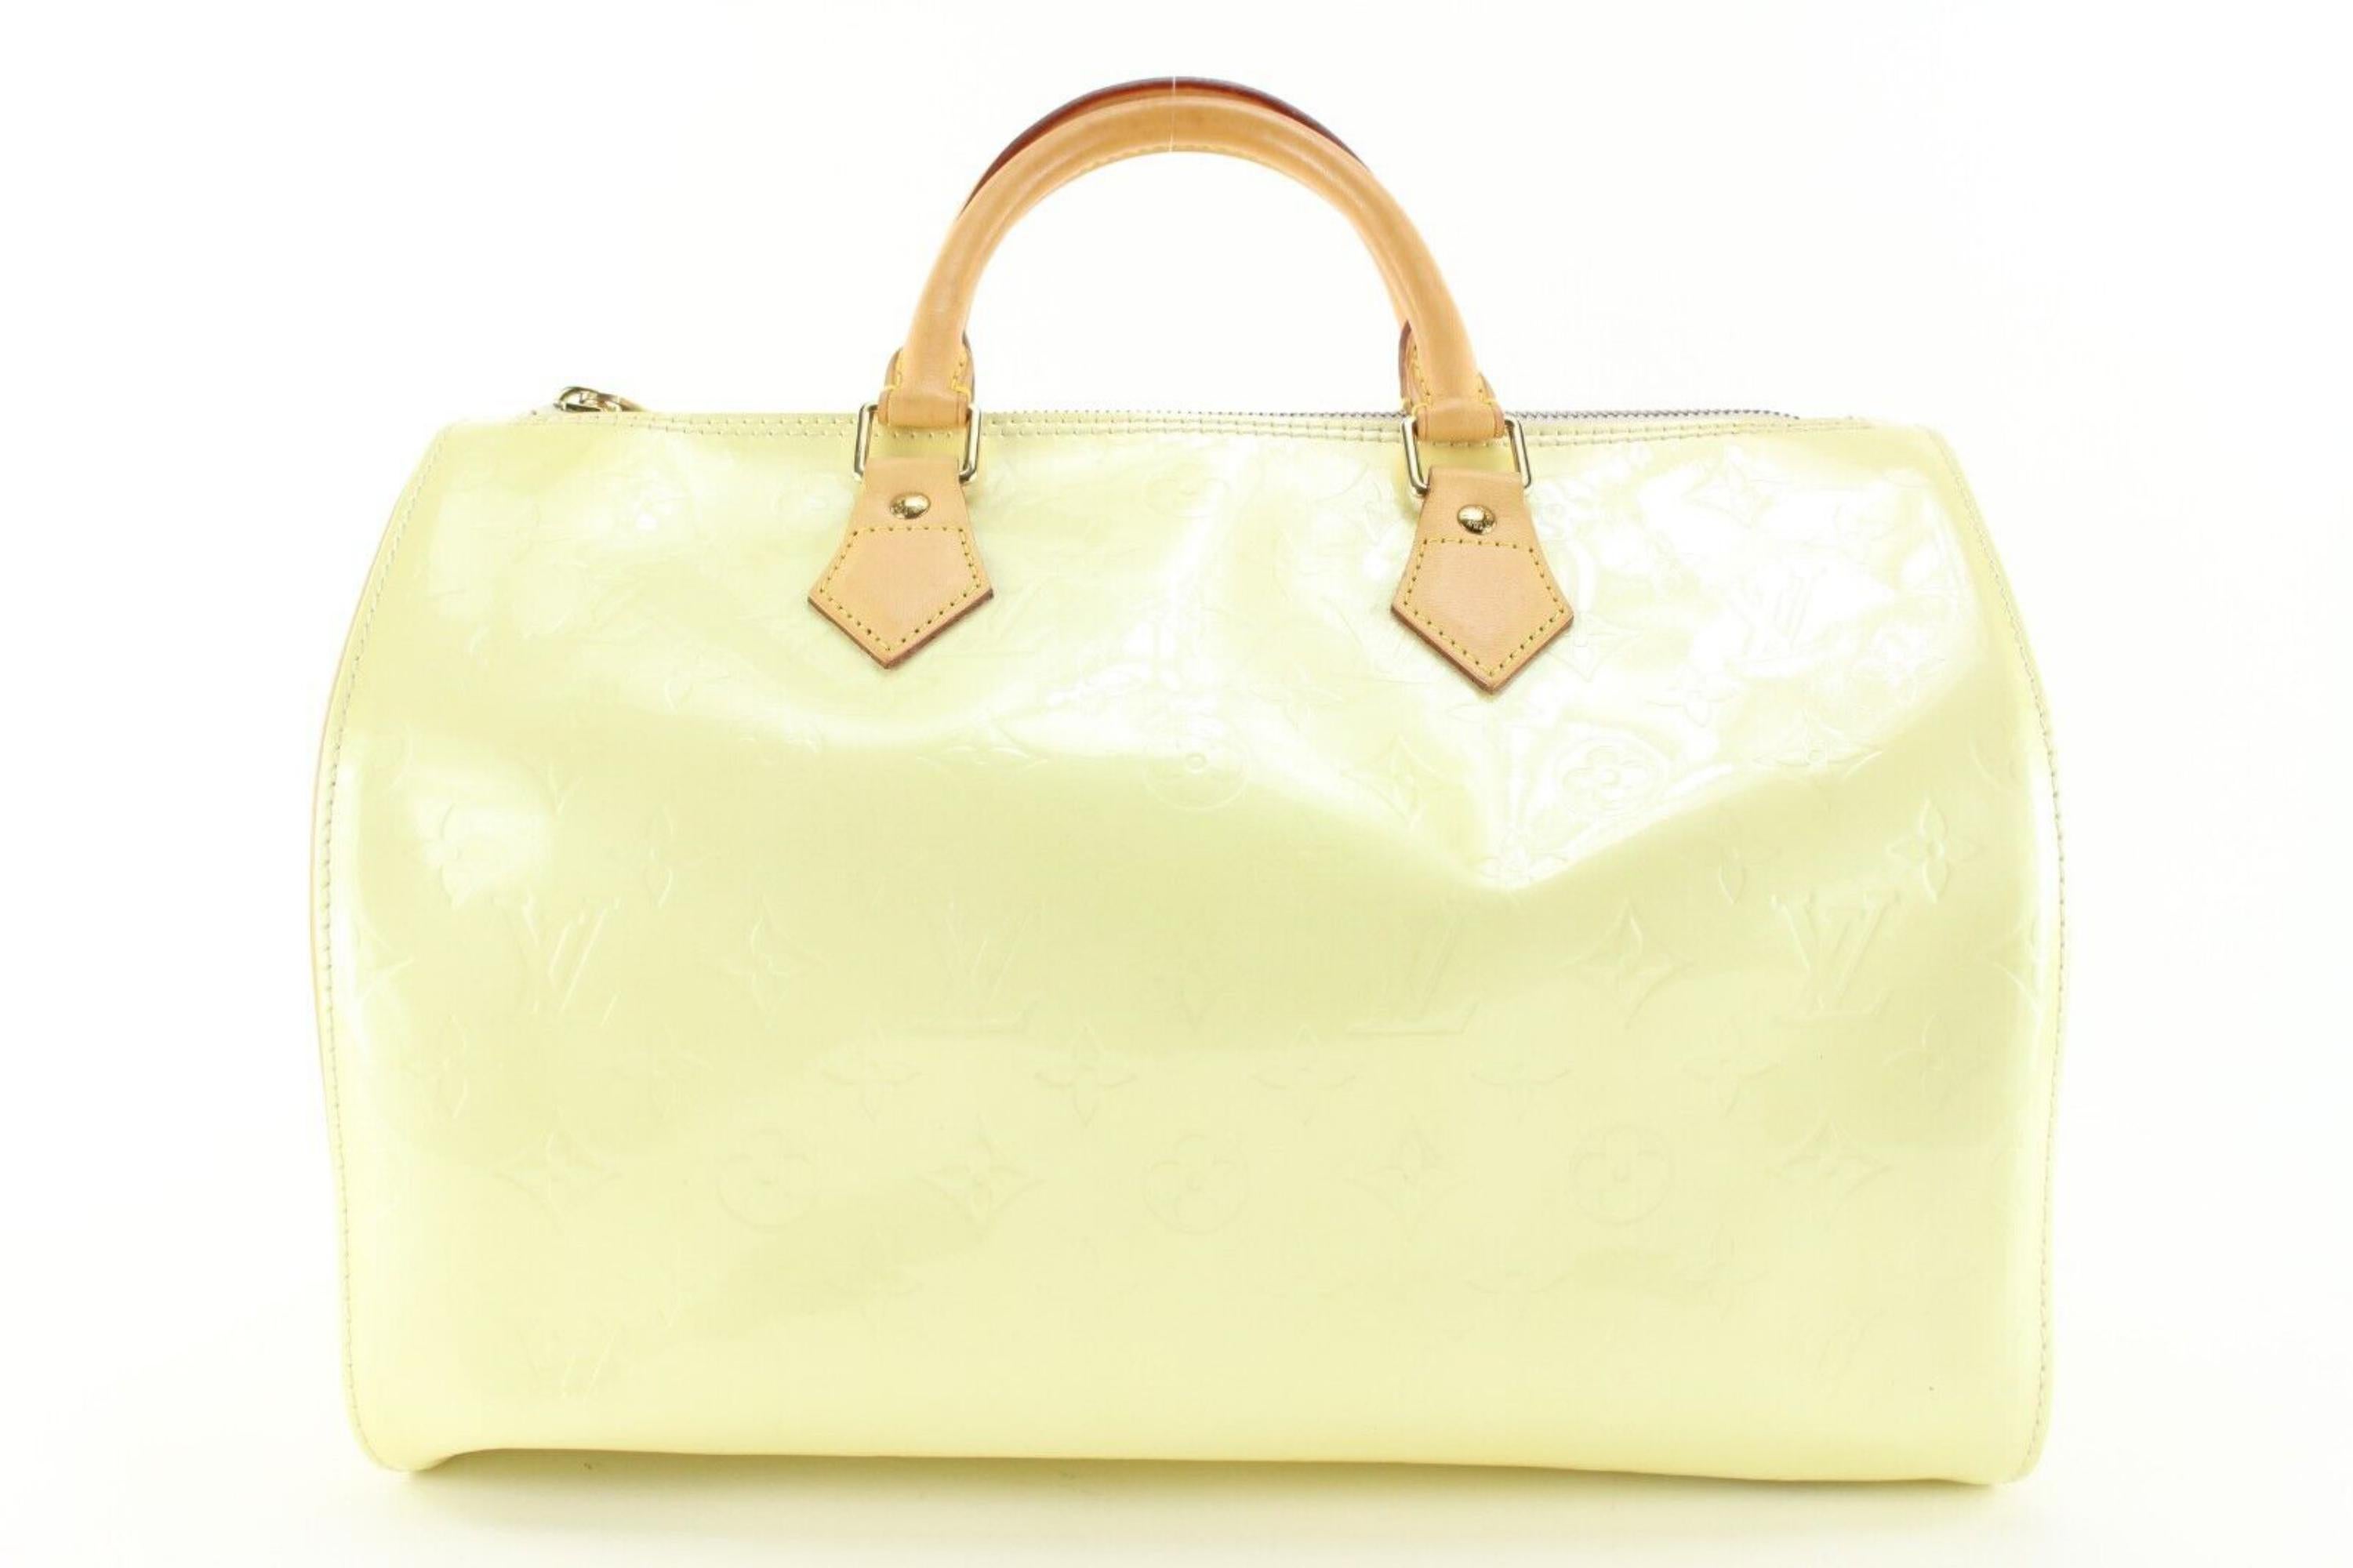 Louis Vuitton Extremely Rare Perle Vernis Speedy 35 3LVJ1108 For Sale 1